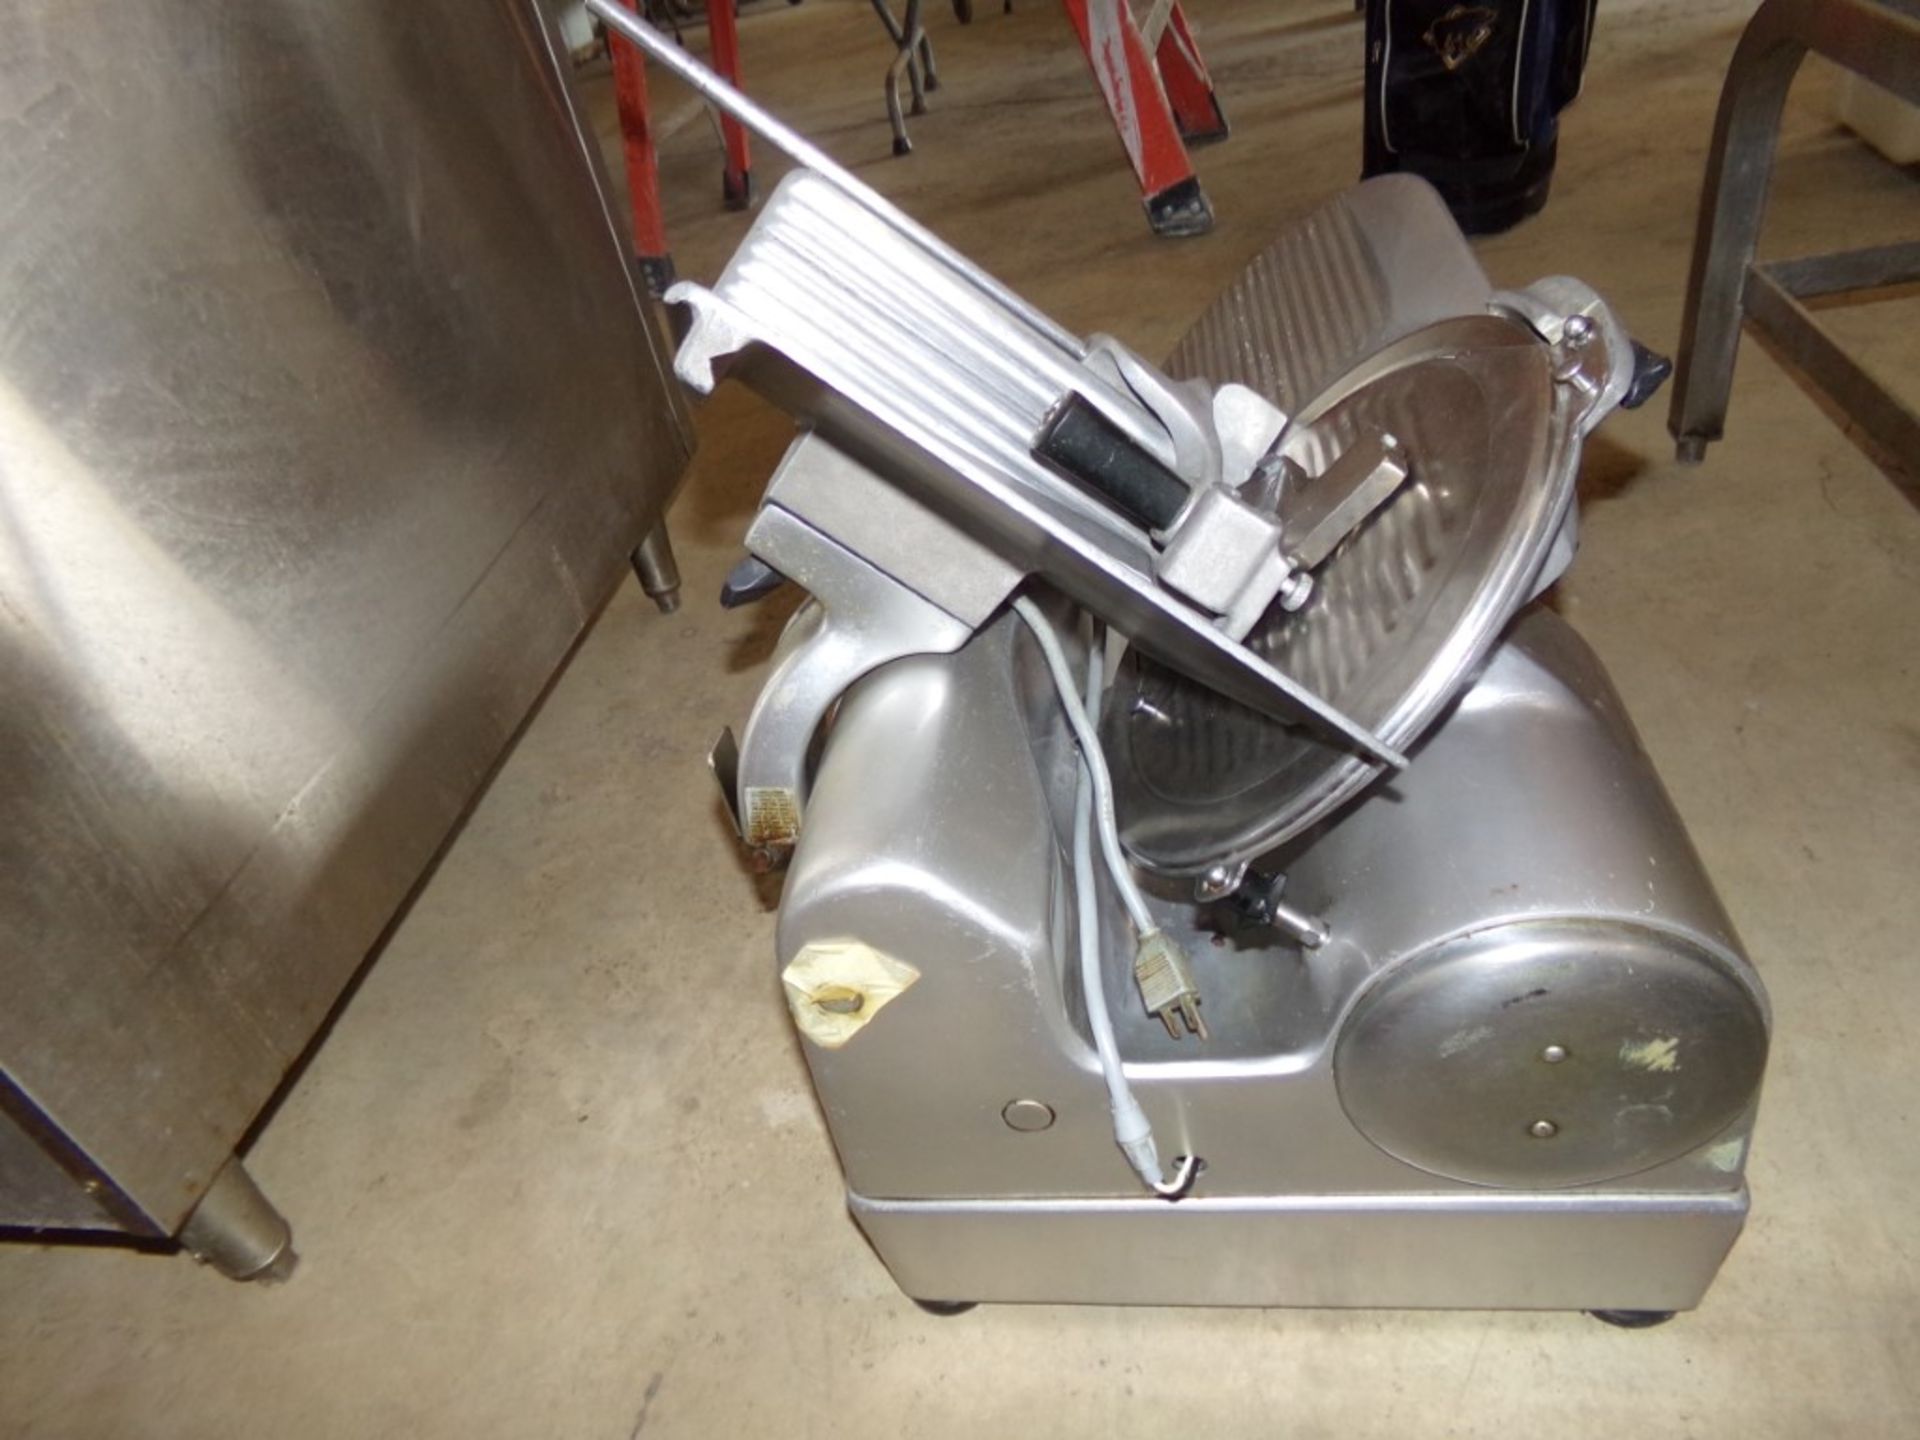 Hobart 8065 Stainless Steel Meat Slicer, Single Phase, From Local School - Image 3 of 3